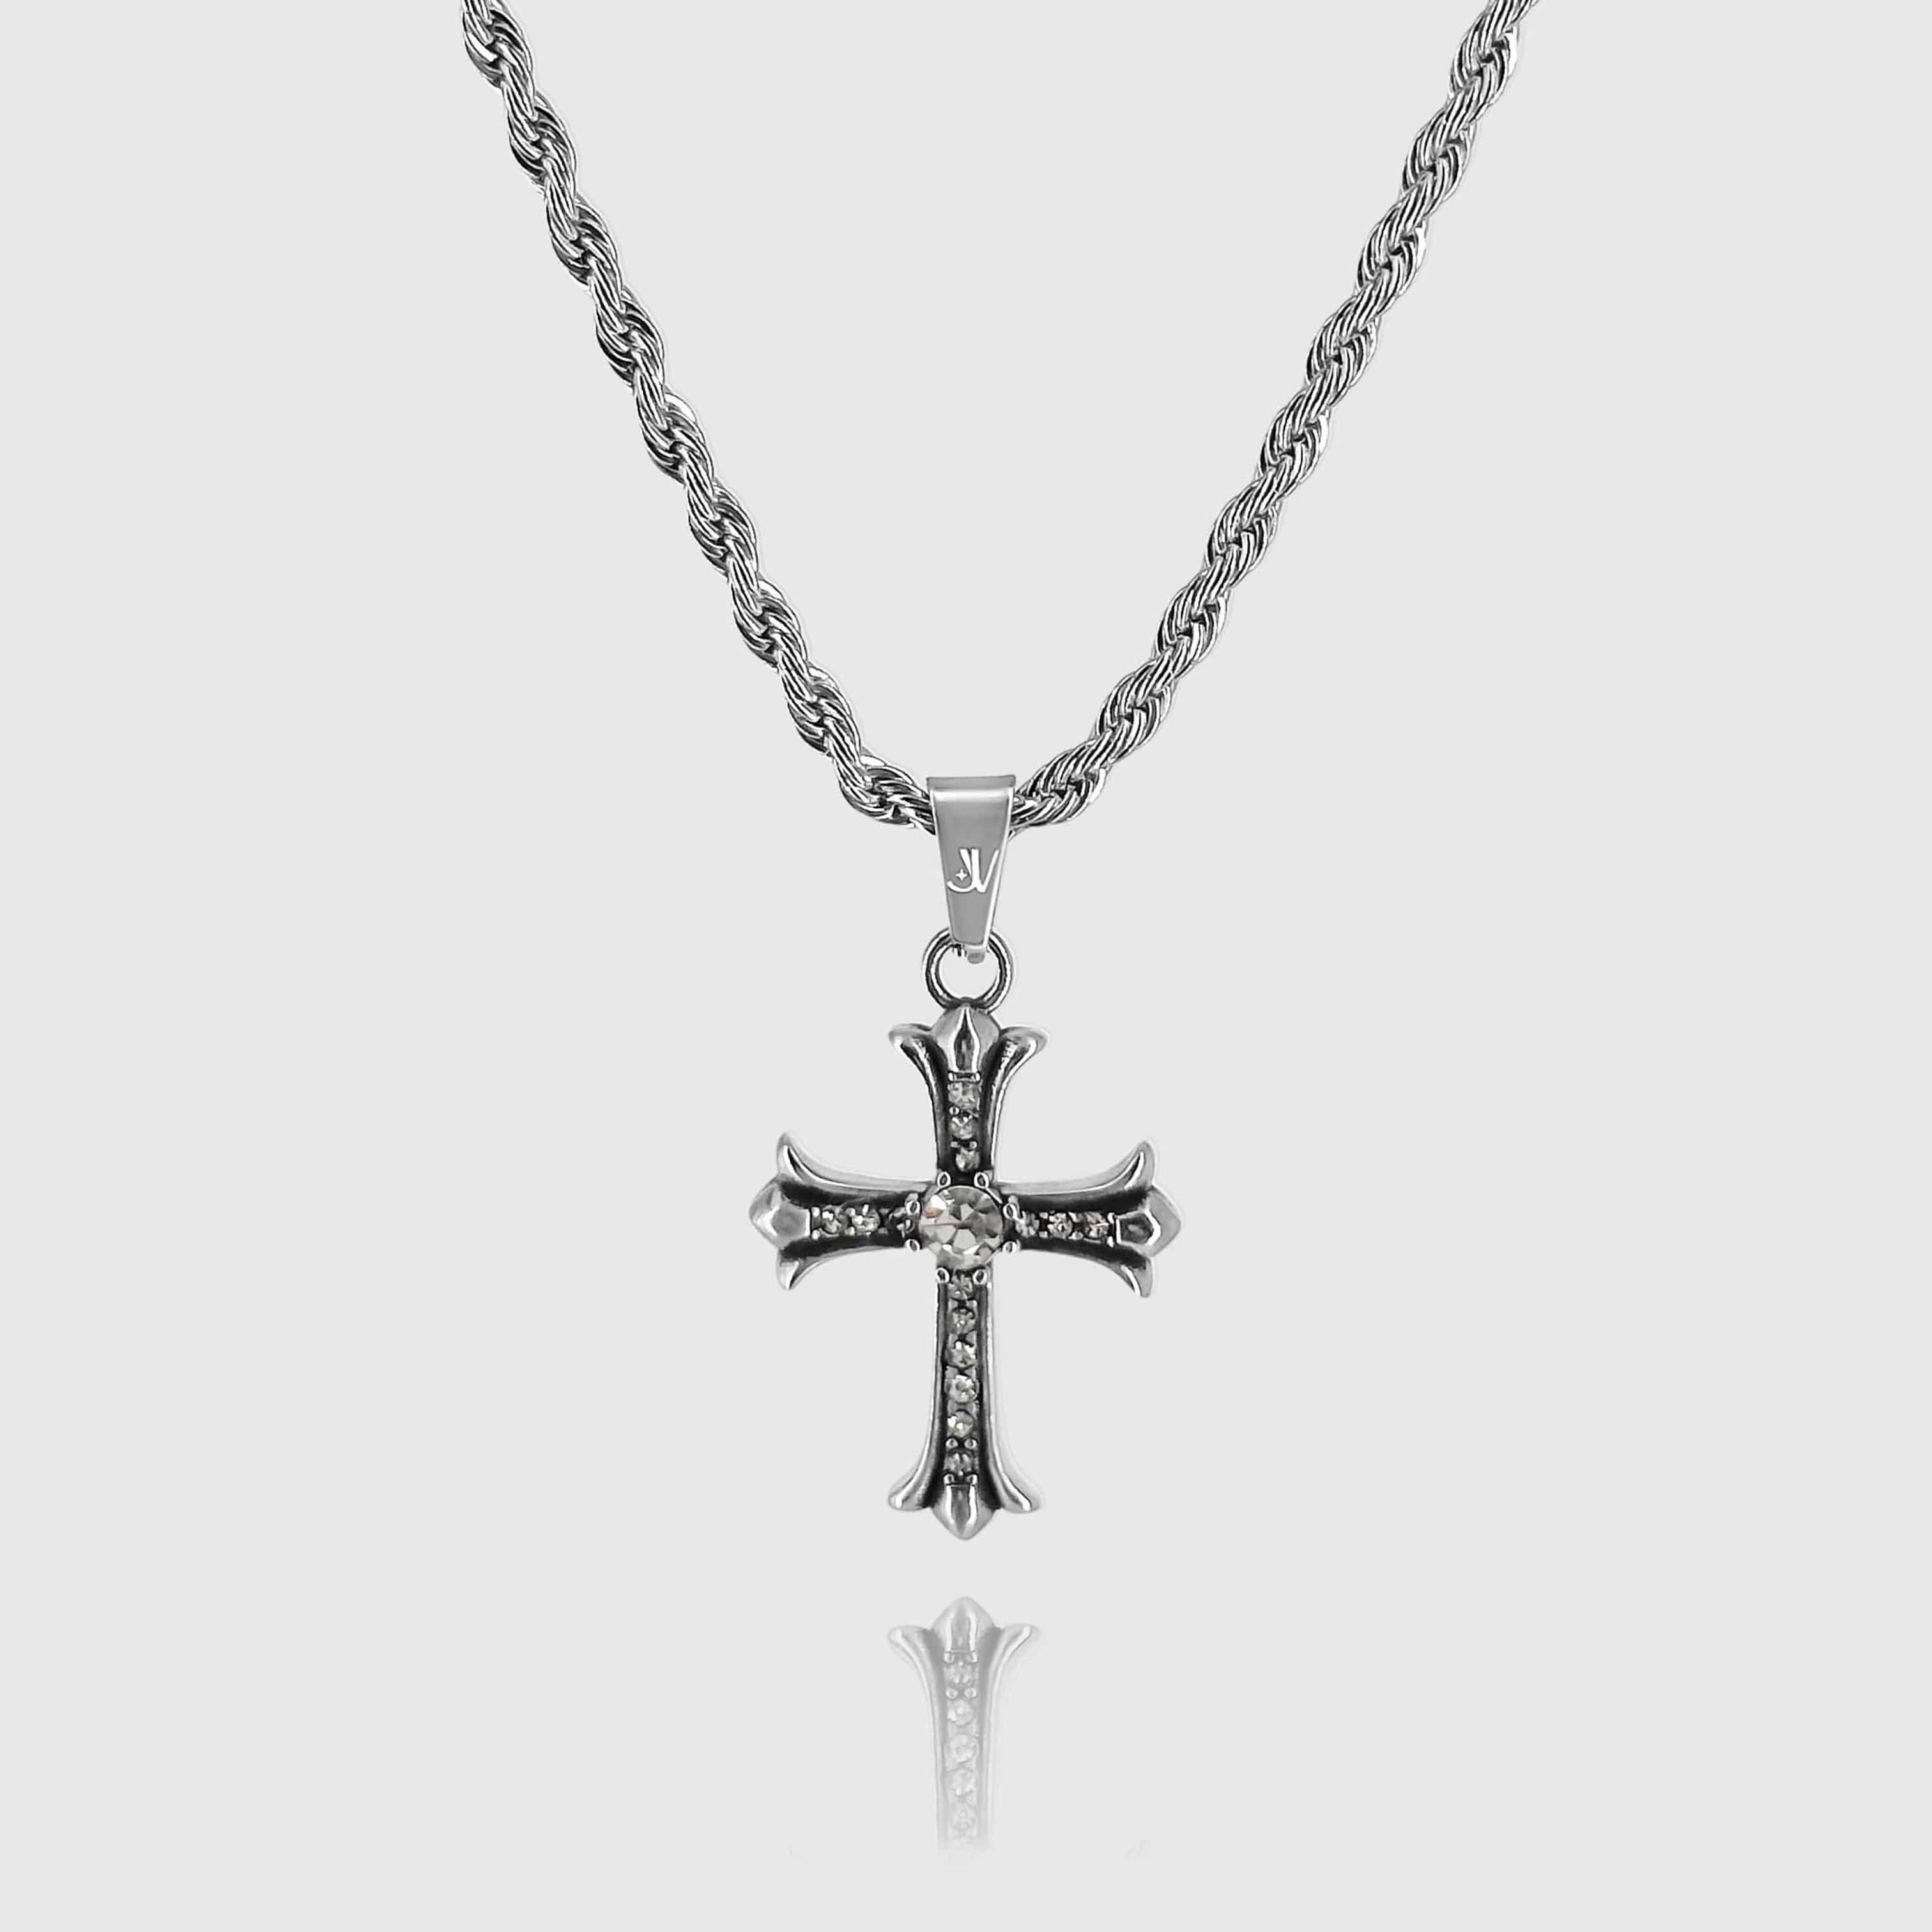 Shiny Cross Rope Chain - Silver (3mm) Chain with Pendant JVILLION